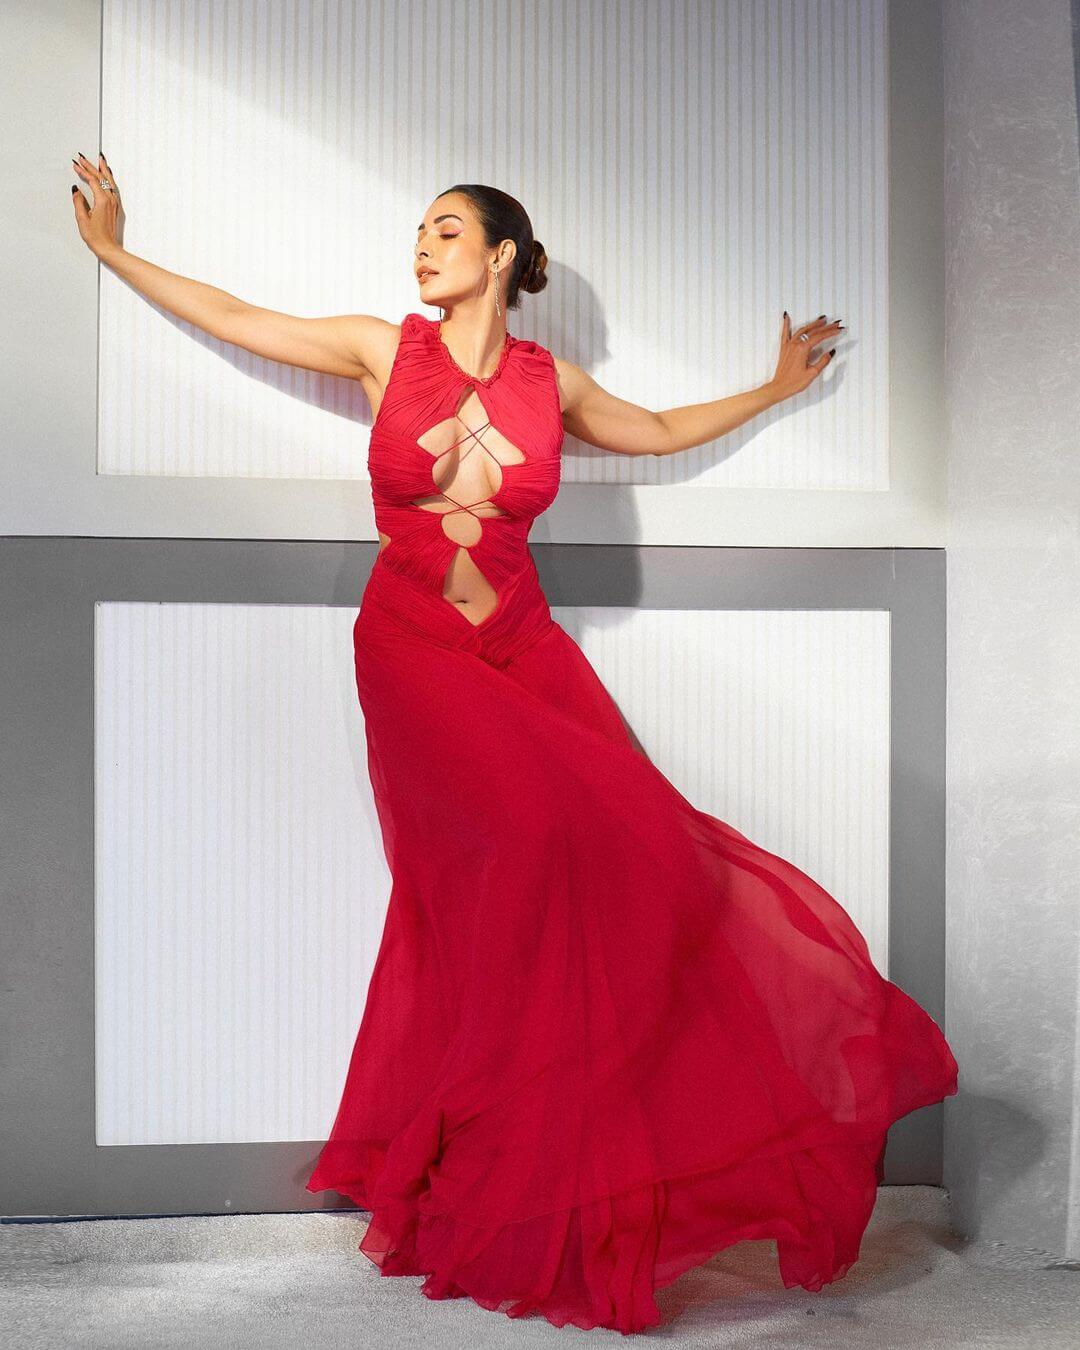 Actress Malaika Arora in a red out cut-out dress. Picture: www.instagram.com